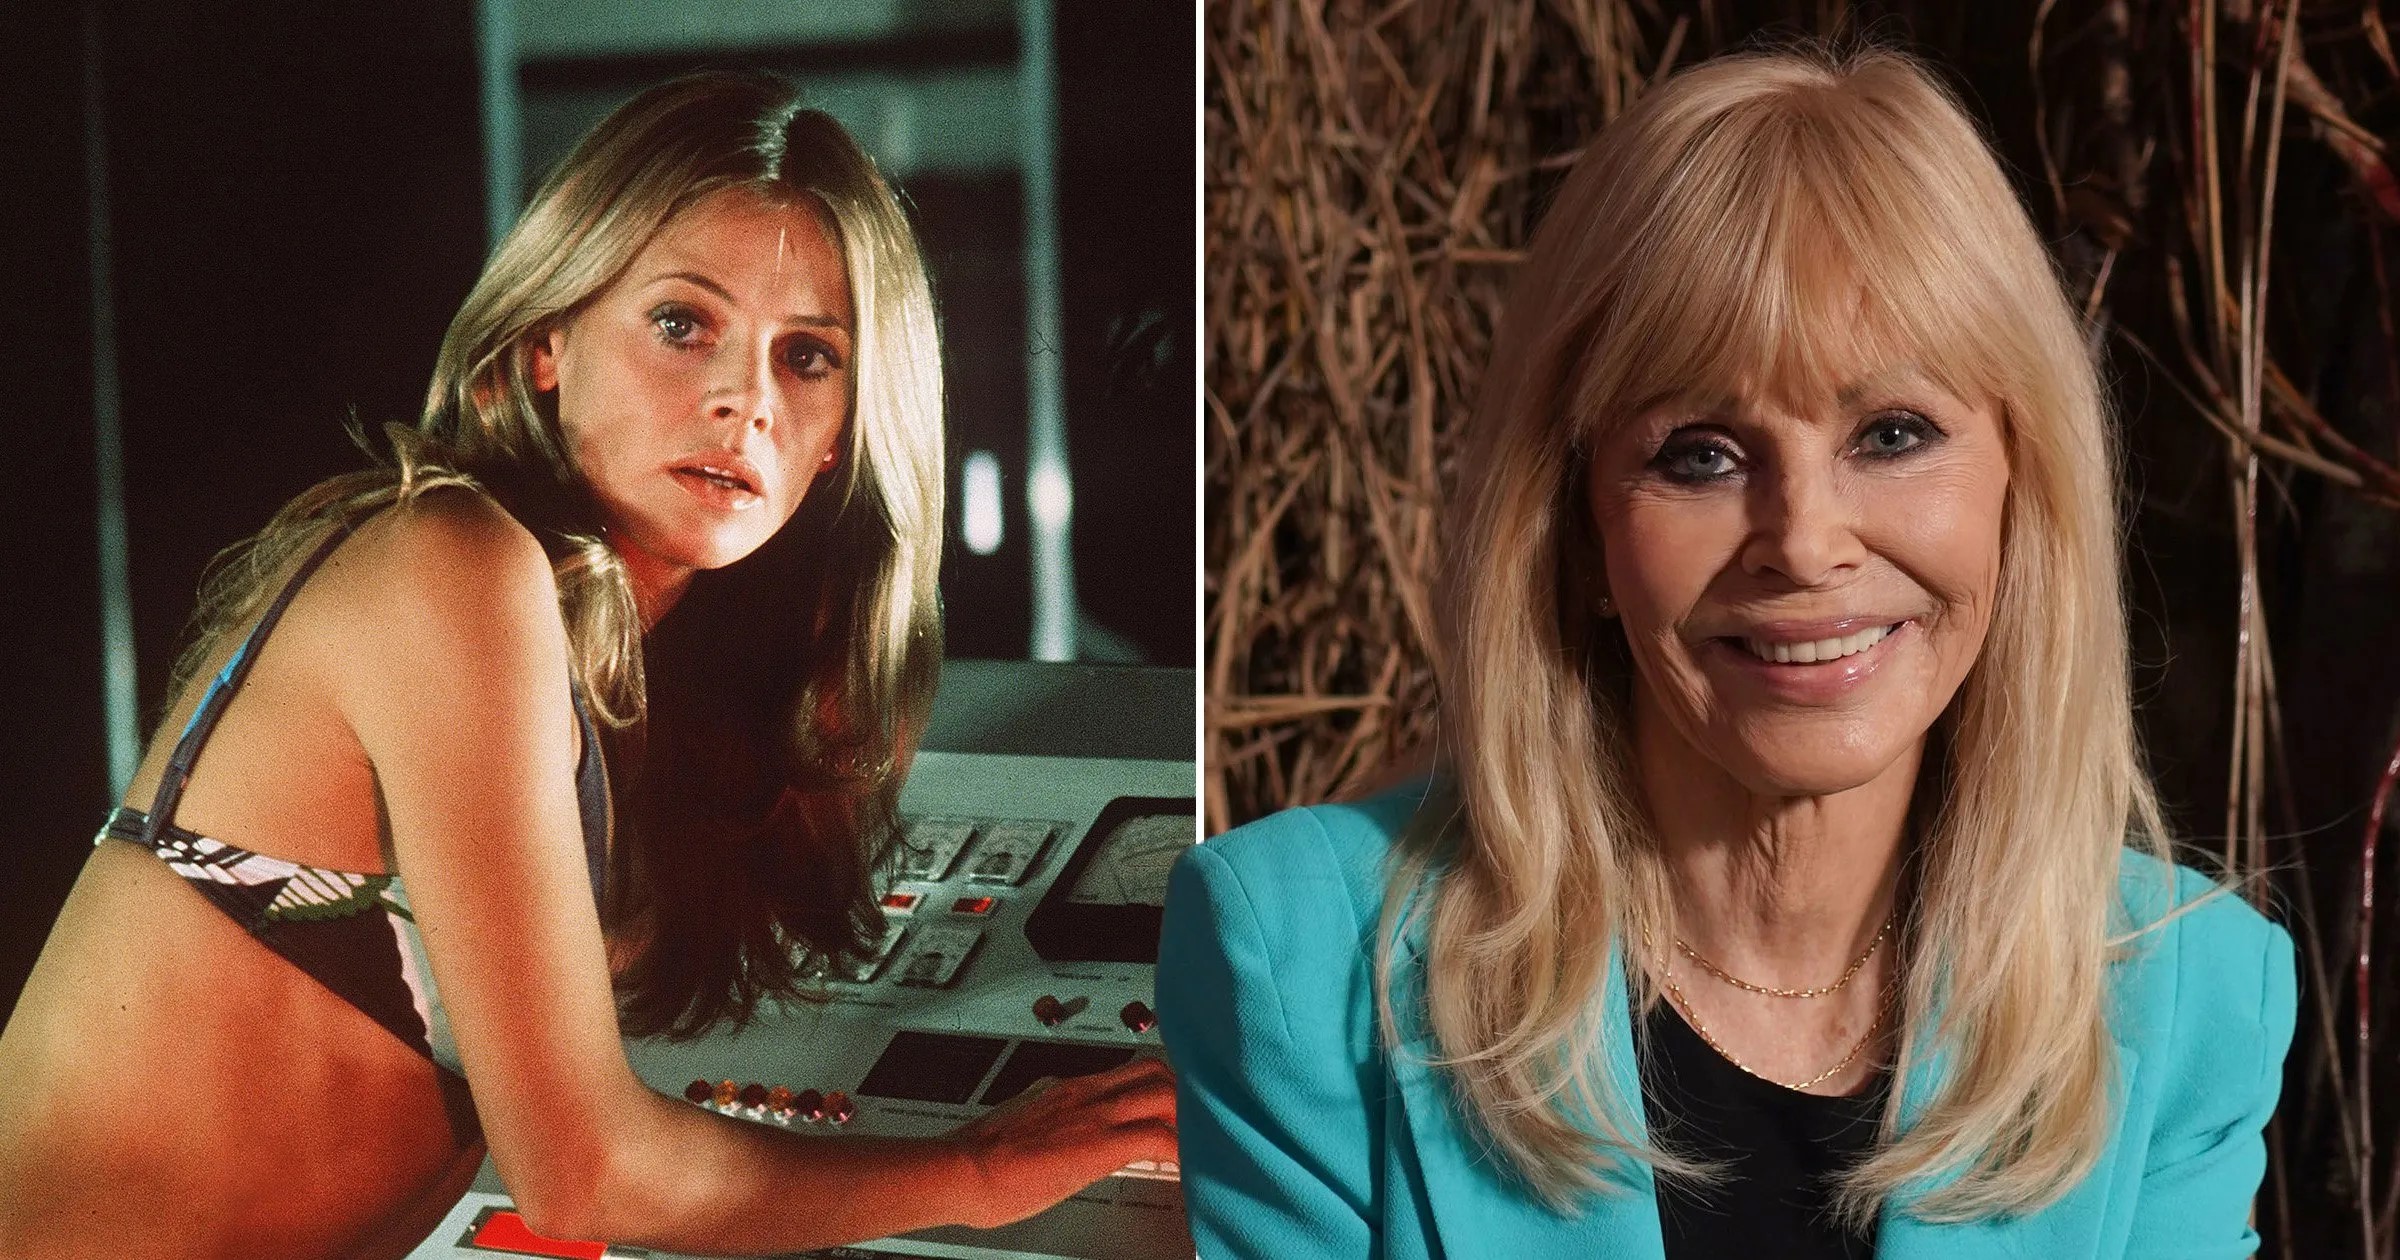 She says she turned her face into a wreck with plastic surgery: Who is Britt Ekland?